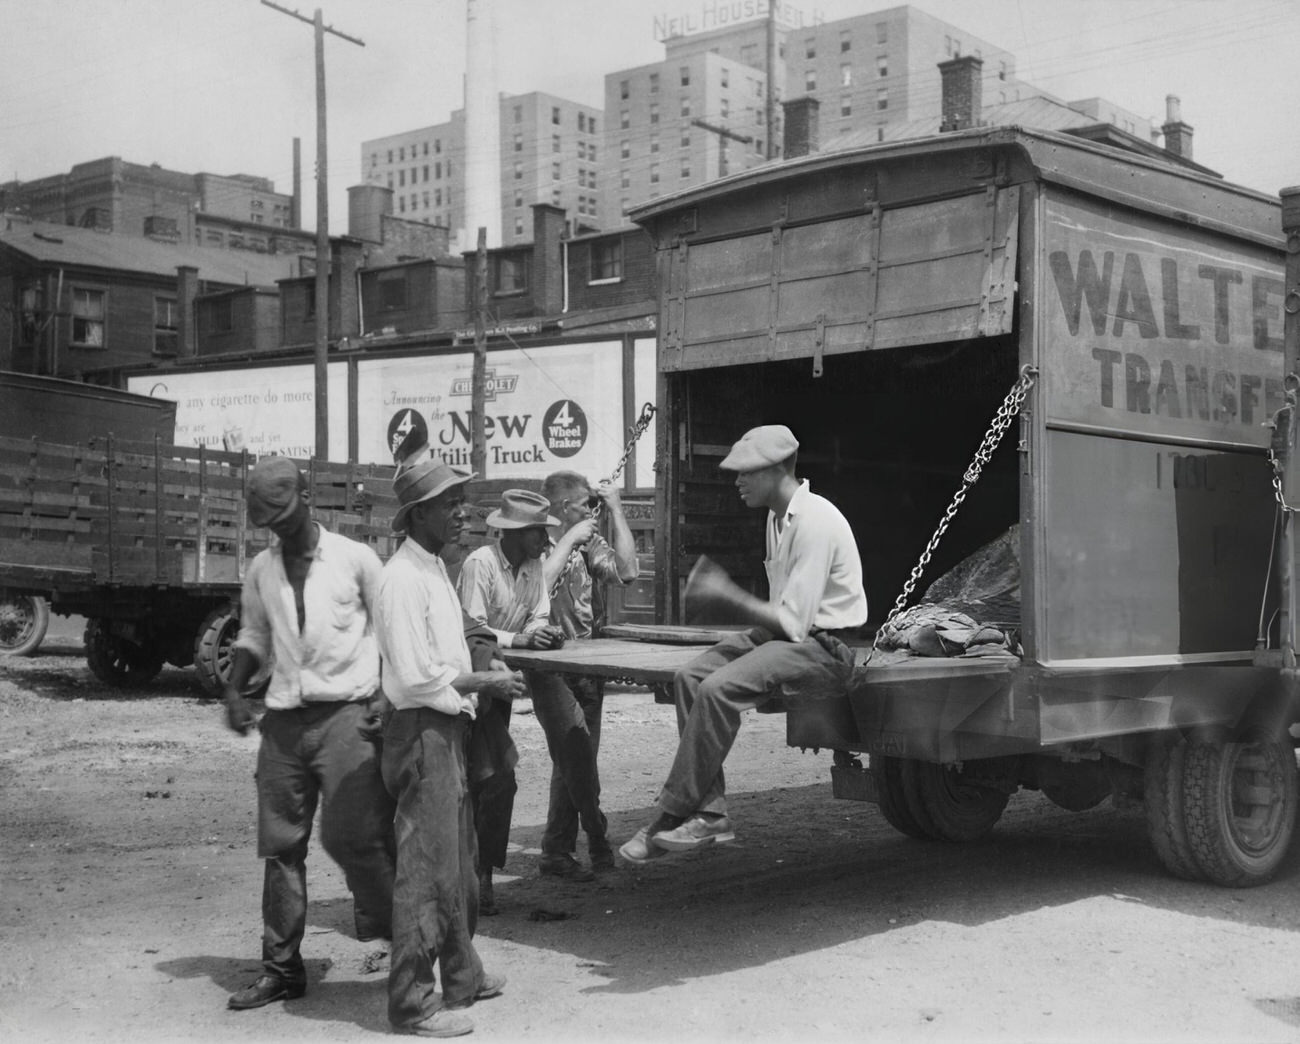 A group of men playing craps, one sitting on a truck's tailgate, at a transport facility on the banks of the Scioto River with the Neil House hotel in the background, Columbus, Ohio.